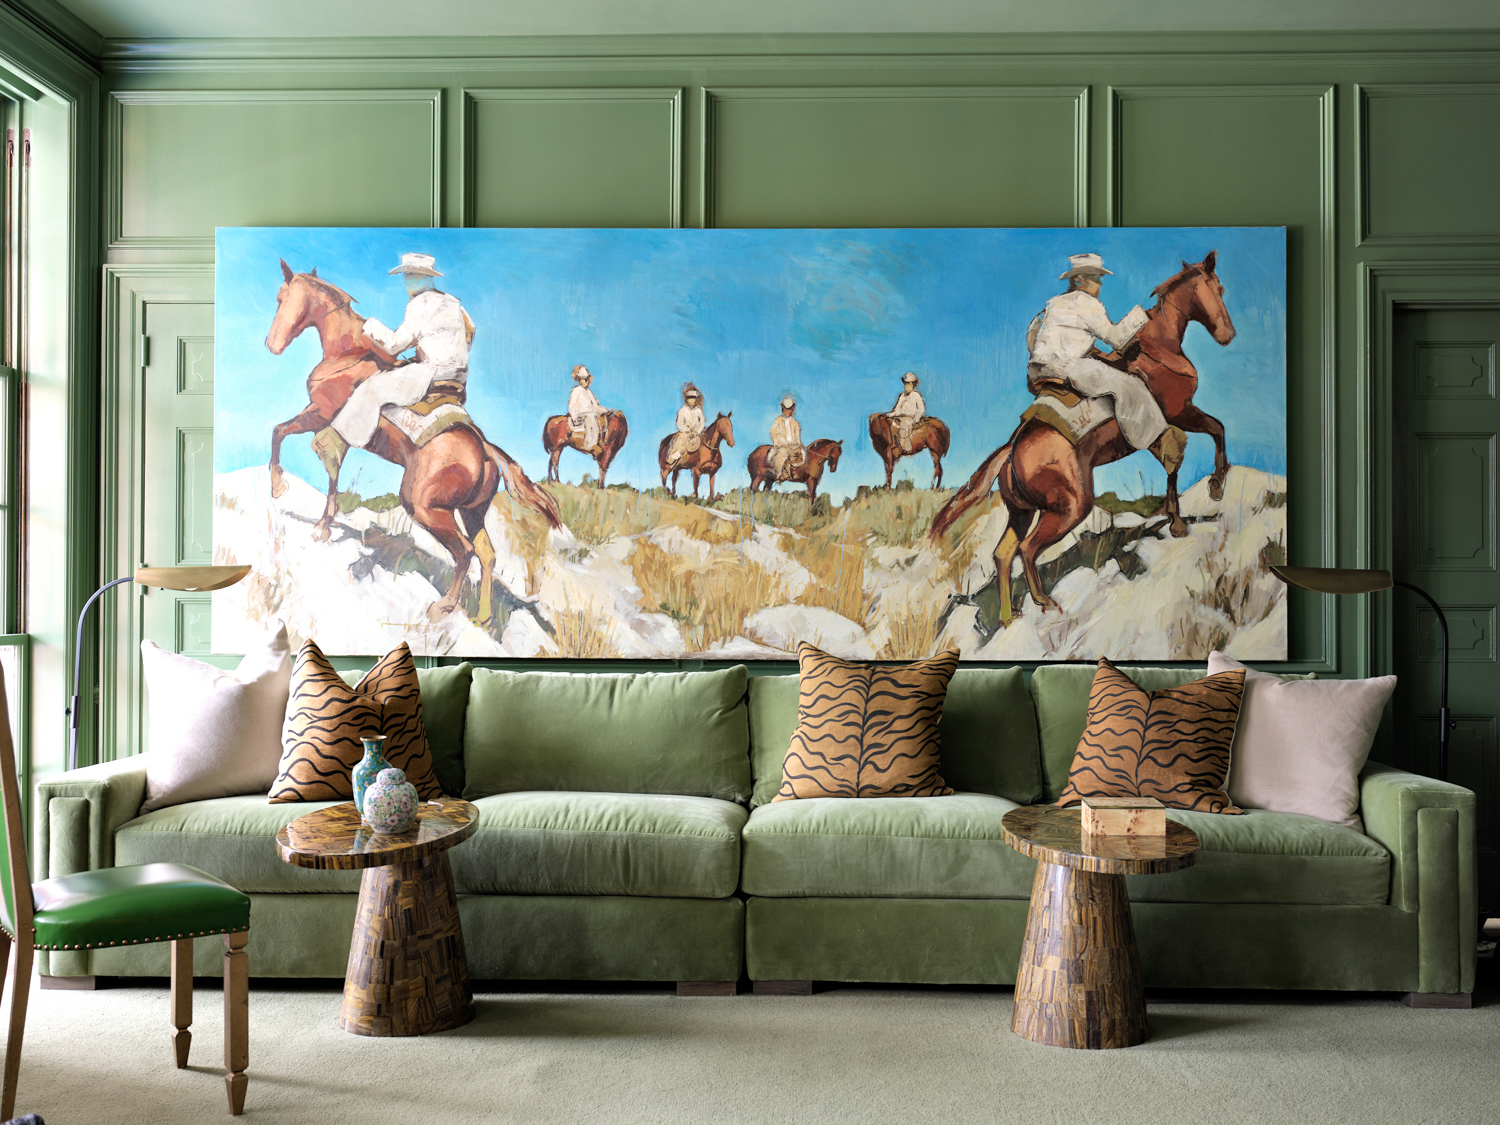 Melanie Turner Interiors green living room with painting of horses